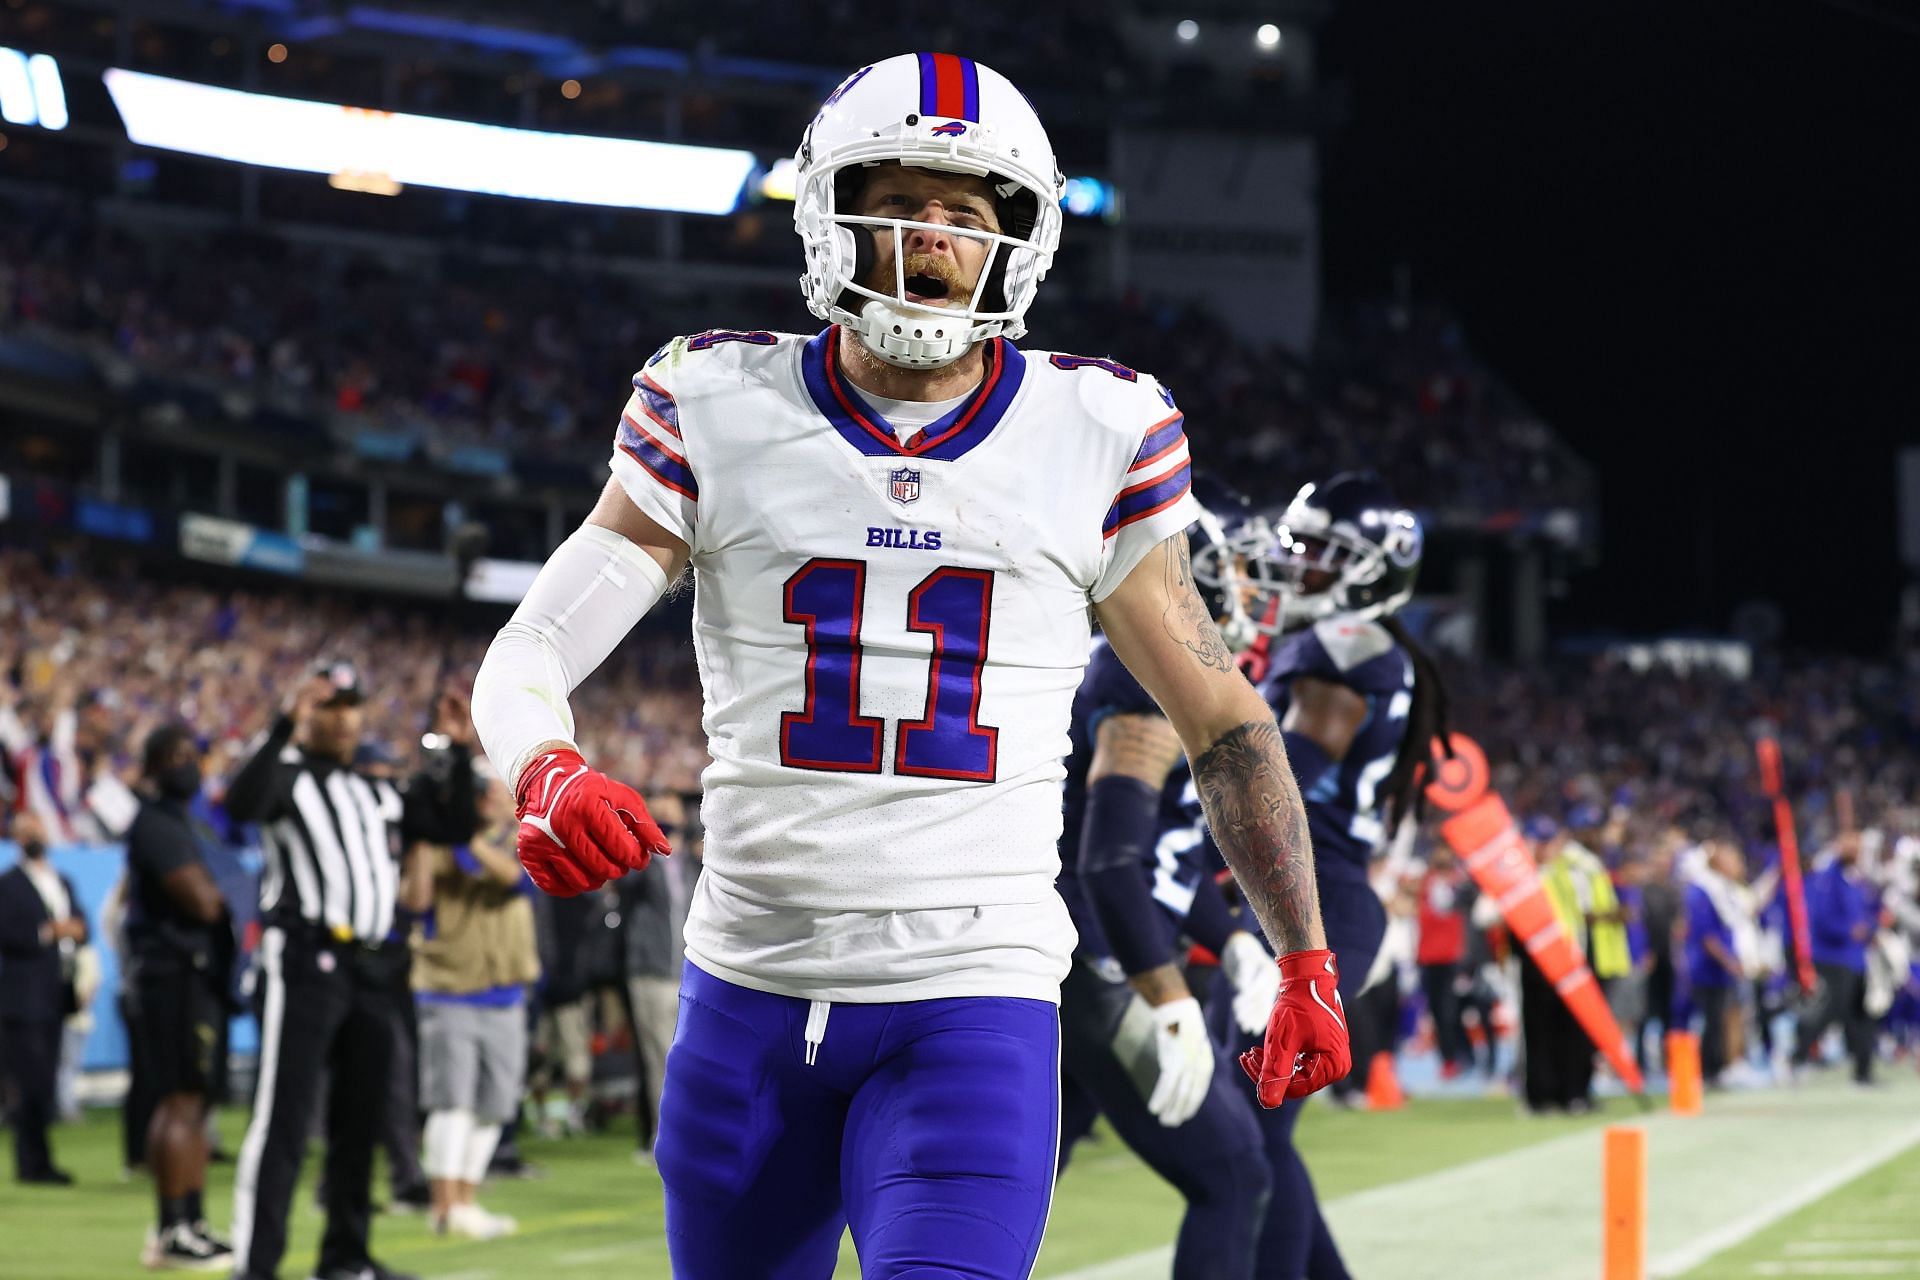 Buffalo Bills receiver Cole Beasley is the latest NFL player to test positive for COVID